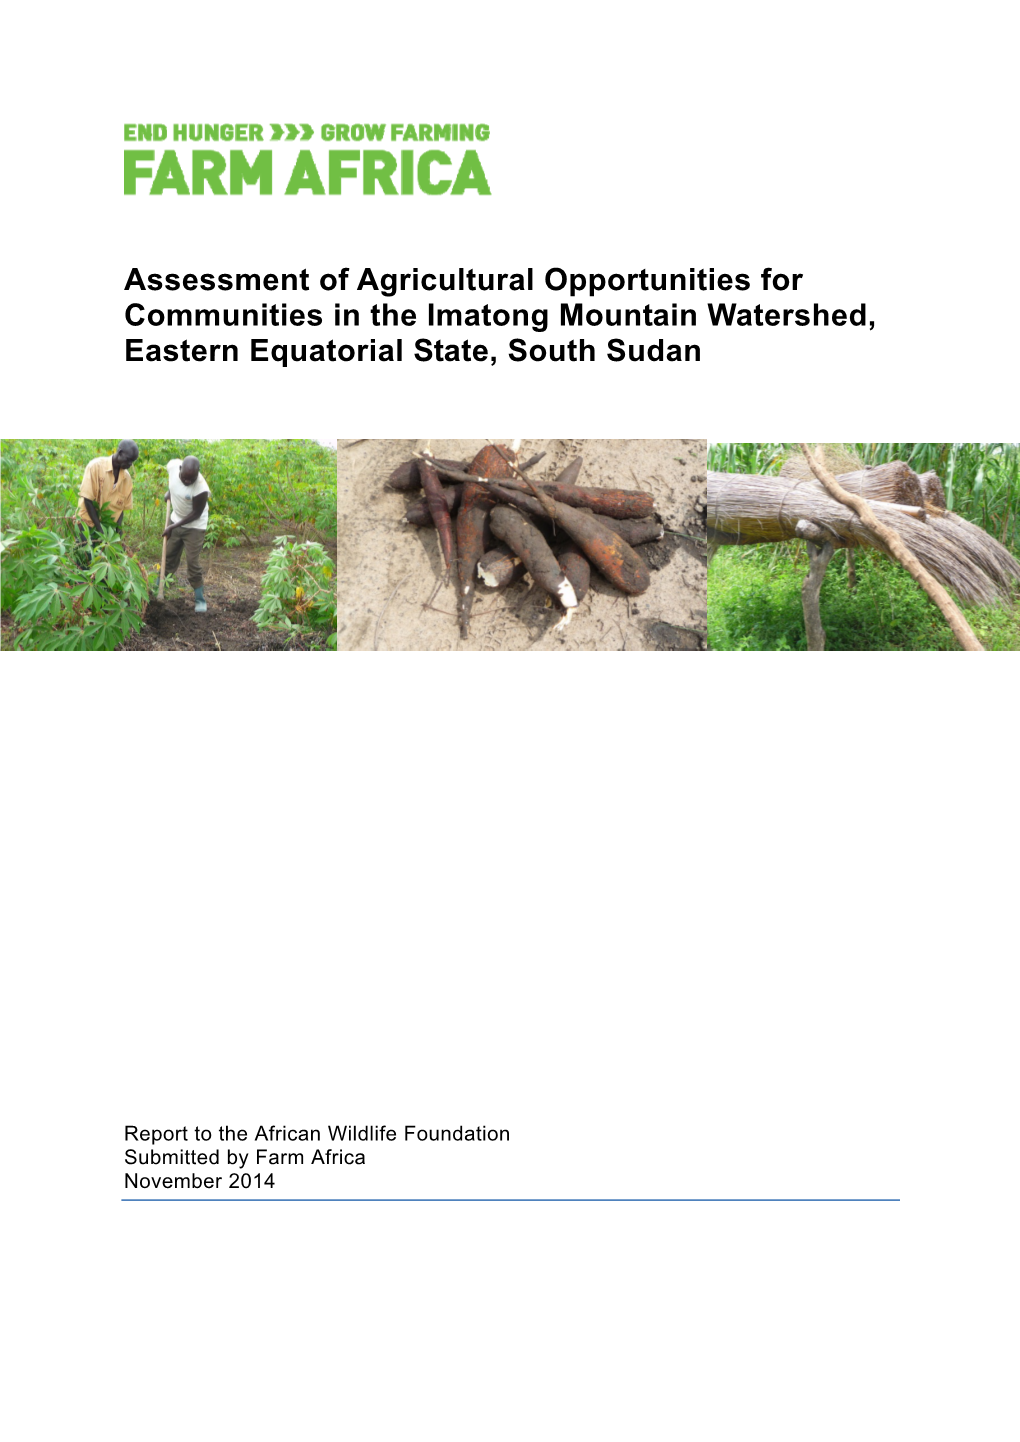 Assessment of Agricultural Opportunities for Communities in the Imatong Mountain Watershed, Eastern Equatorial State, South Sudan